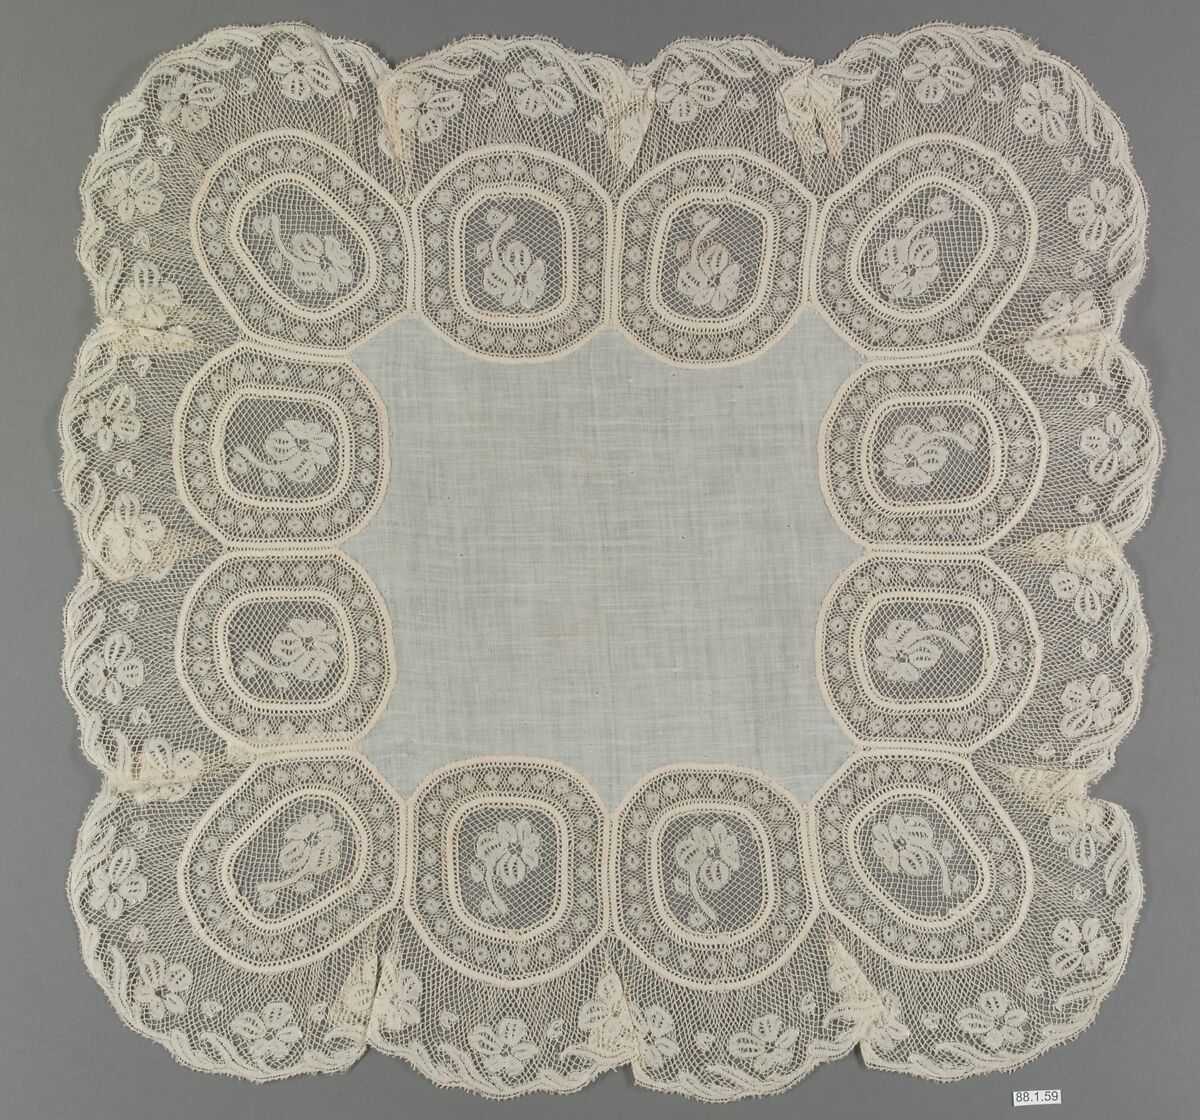 Handkerchief, Bobbin lace: border and medallions of Valenciennes; square or diamond plaited mesh., French 